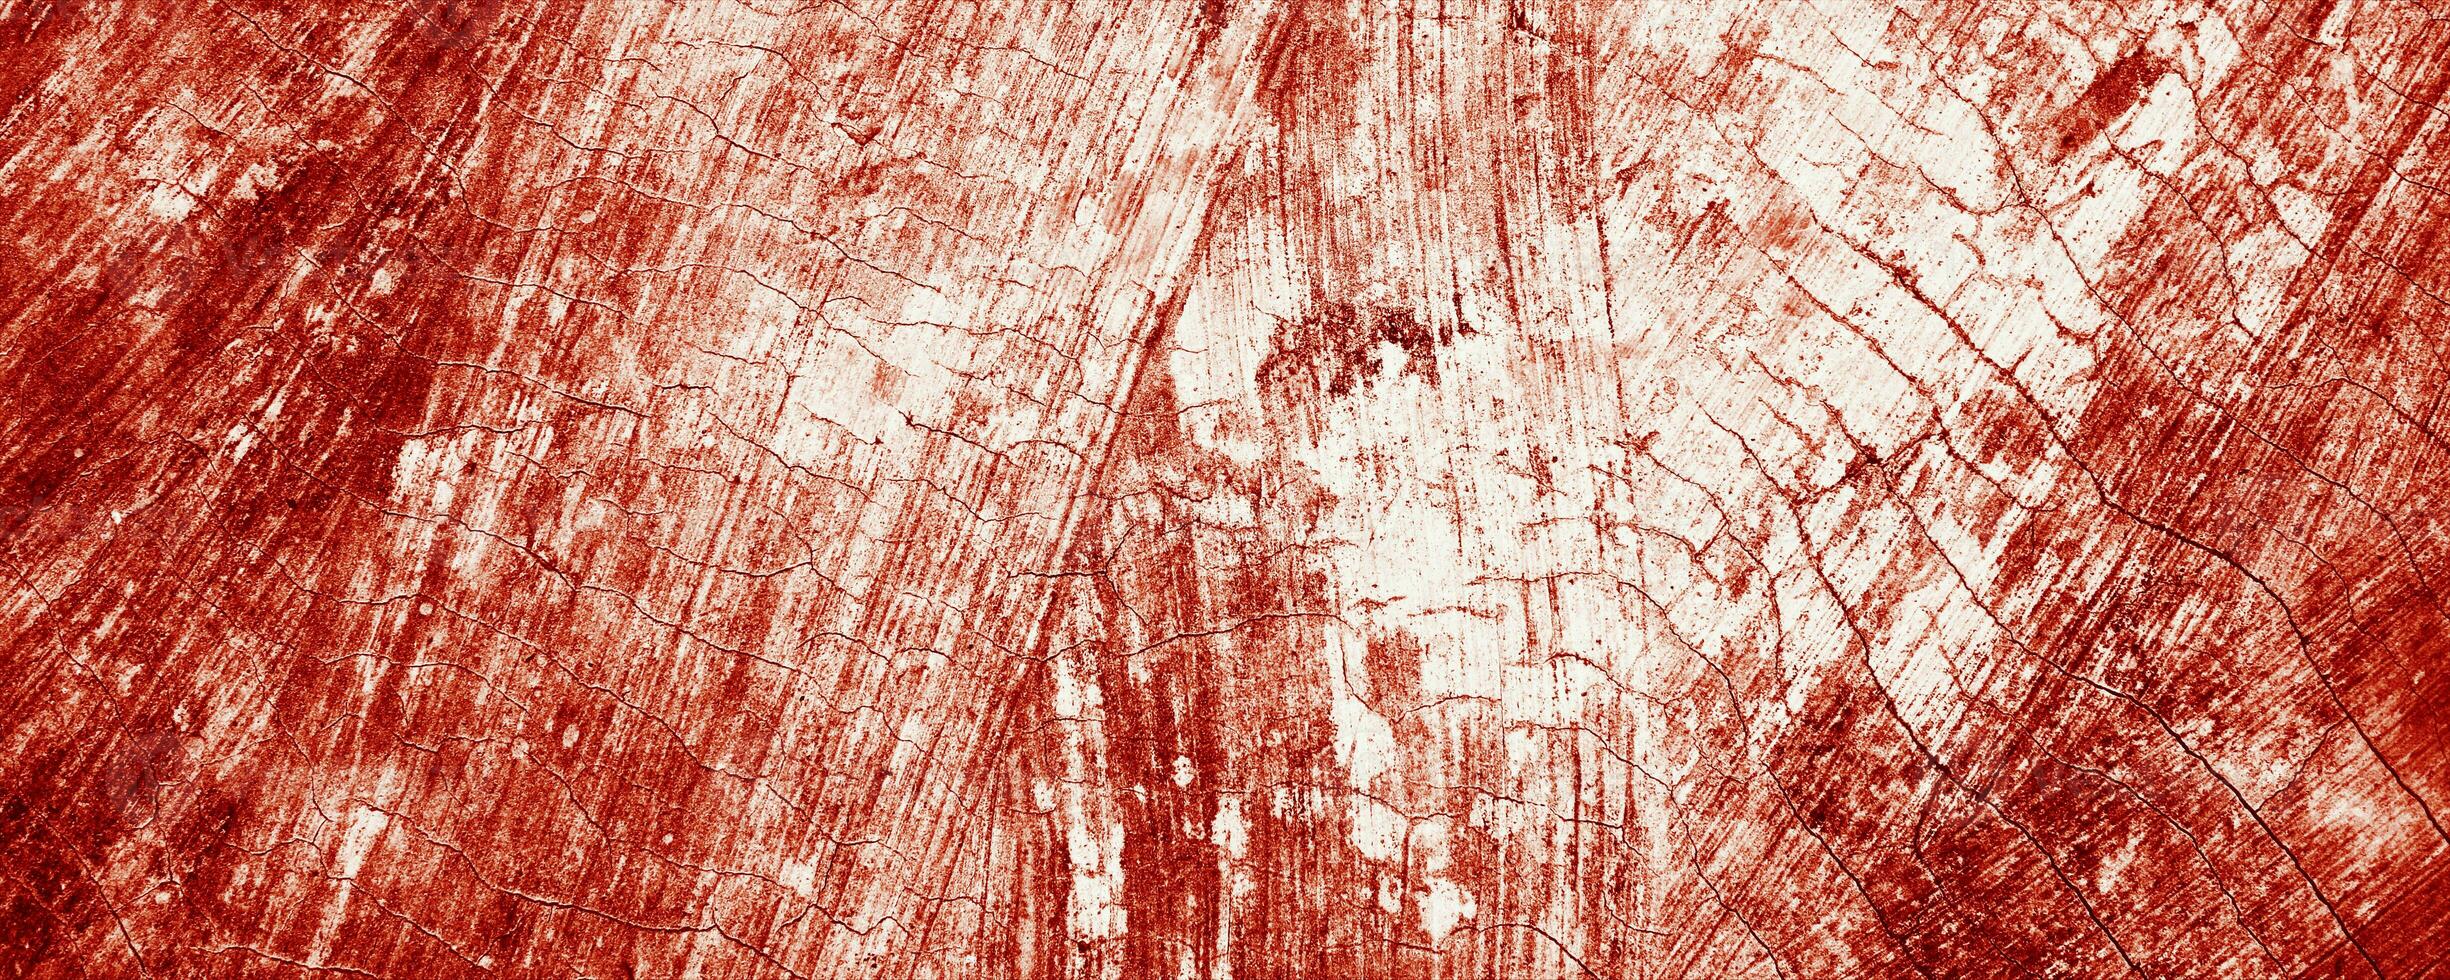 Splatters of red paint resemble fresh blood, their jagged edges contributing to a sense of unease. The stains, reminiscent of Halloween horrors. photo